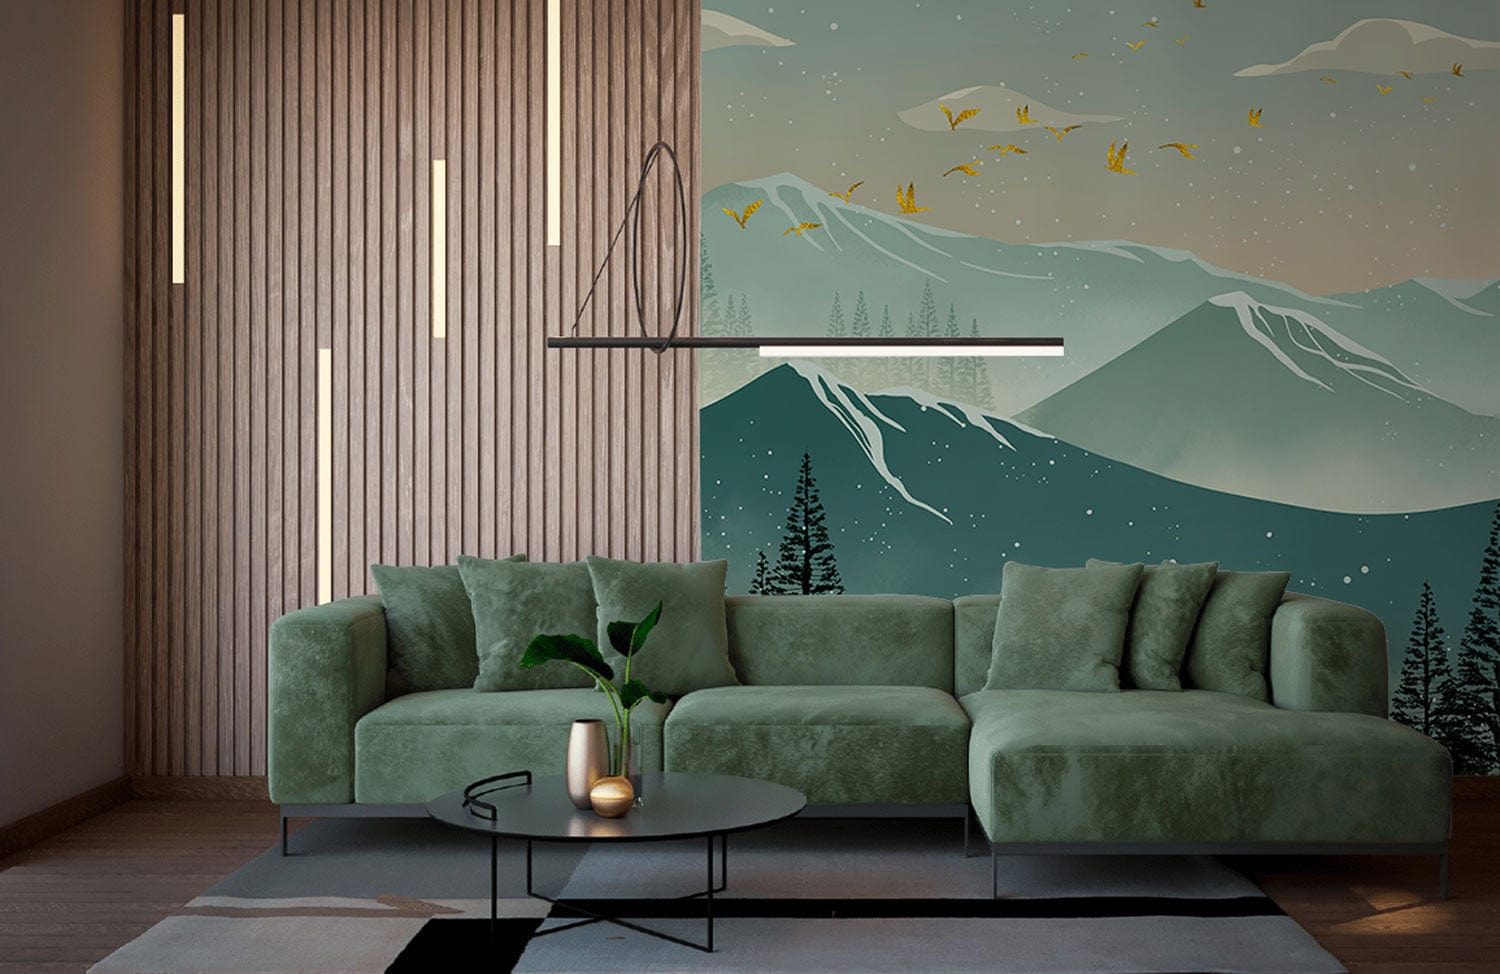 wallpaper mural with an ombre mountain scene for the inside of a home